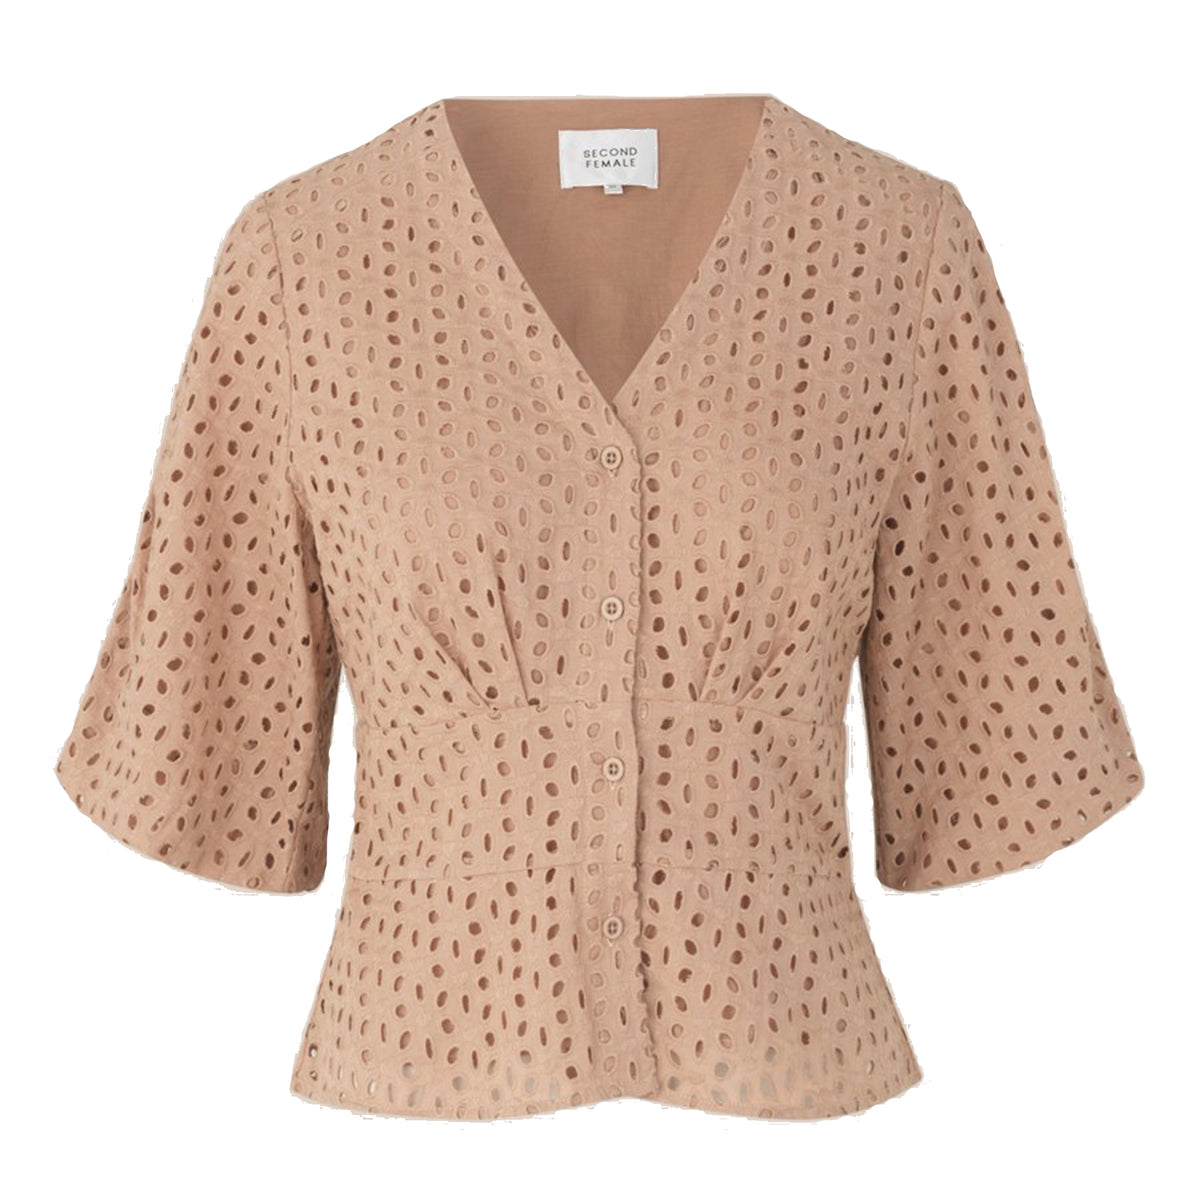 Milly Broderie blouse